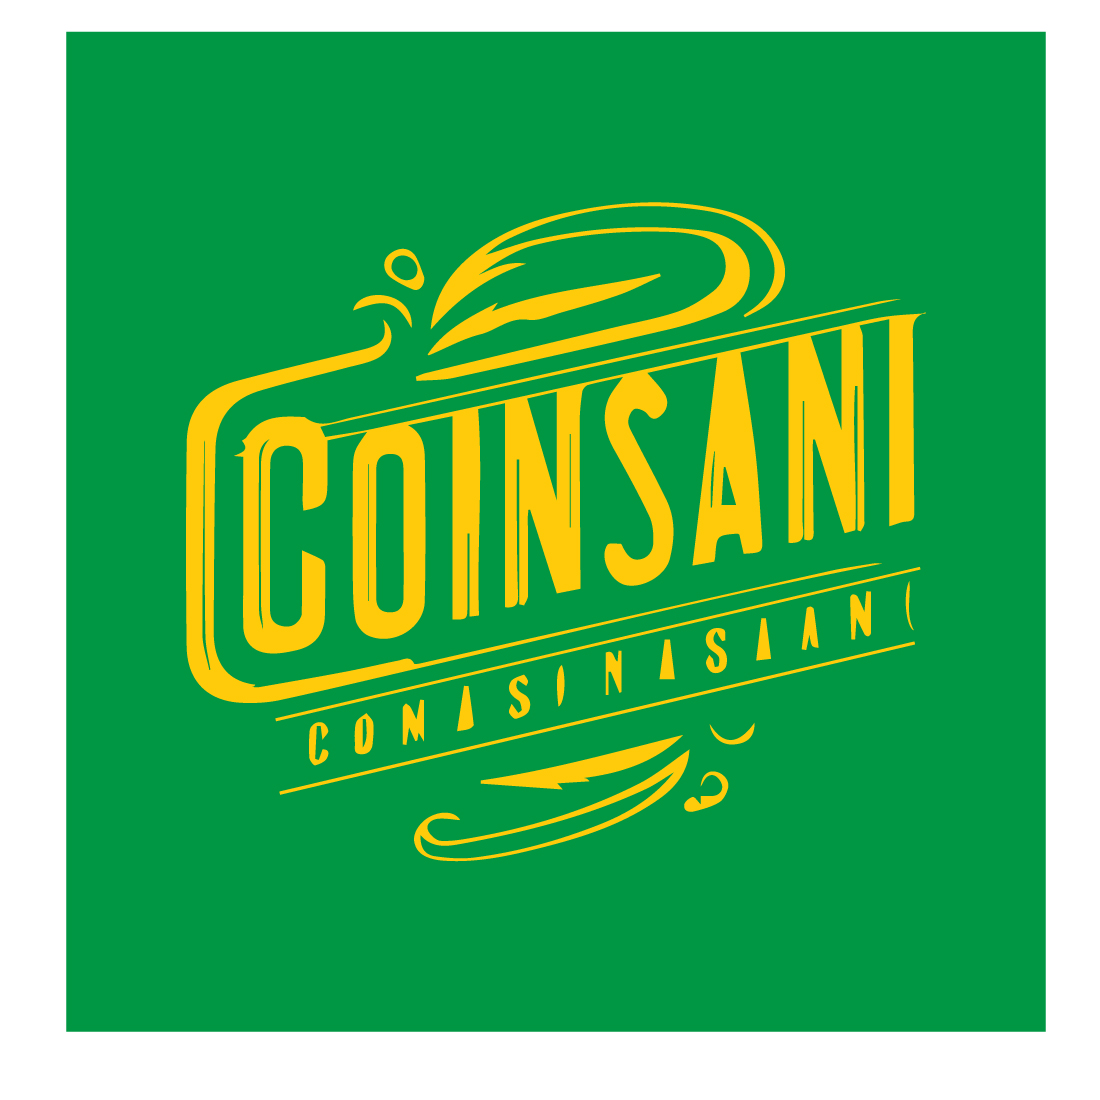 Green and yellow logo with the words consani.